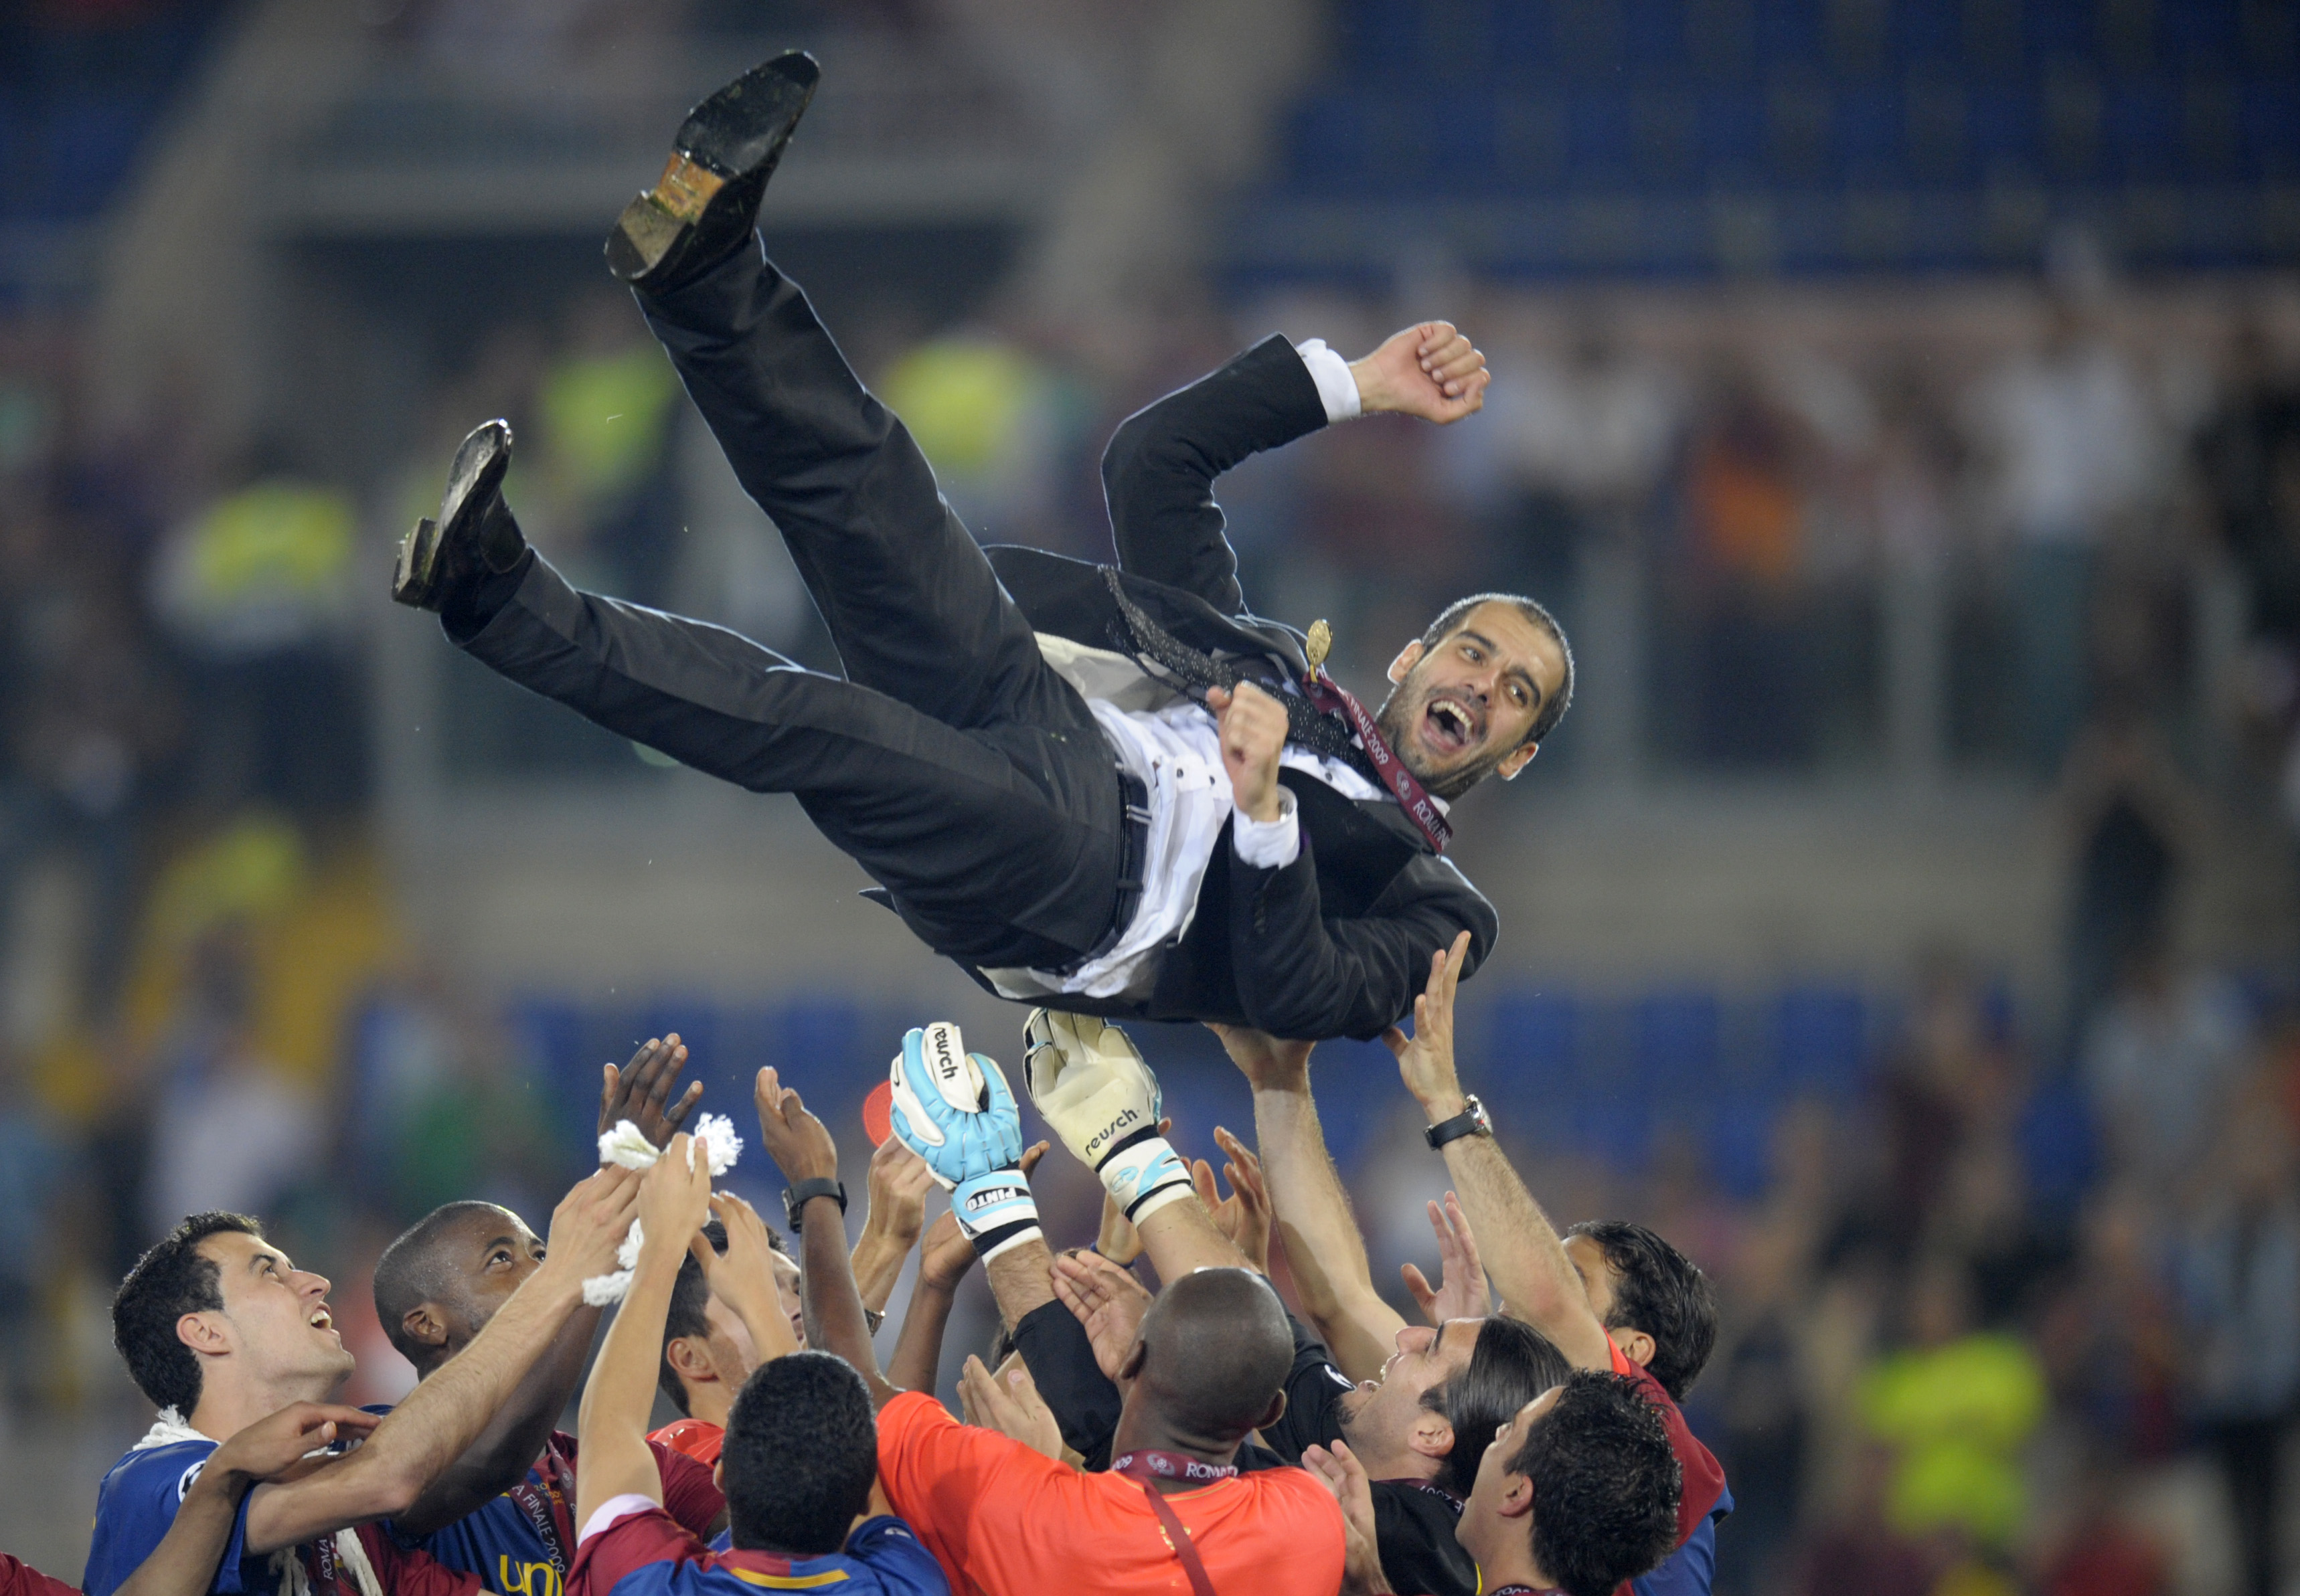 Barcelona´s players celebrate with their coach Josep Guardiola (top) after winning the Champions League Cup on May 27, 2009 at the Olympic Stadium in Rome. Barcelona defeated  Manchester United 2-0 in the final of the UEFA football Champions League.      AFP PHOTO / LLUIS GENE (Photo credit should read LLUIS GENE/AFP/Getty Images)